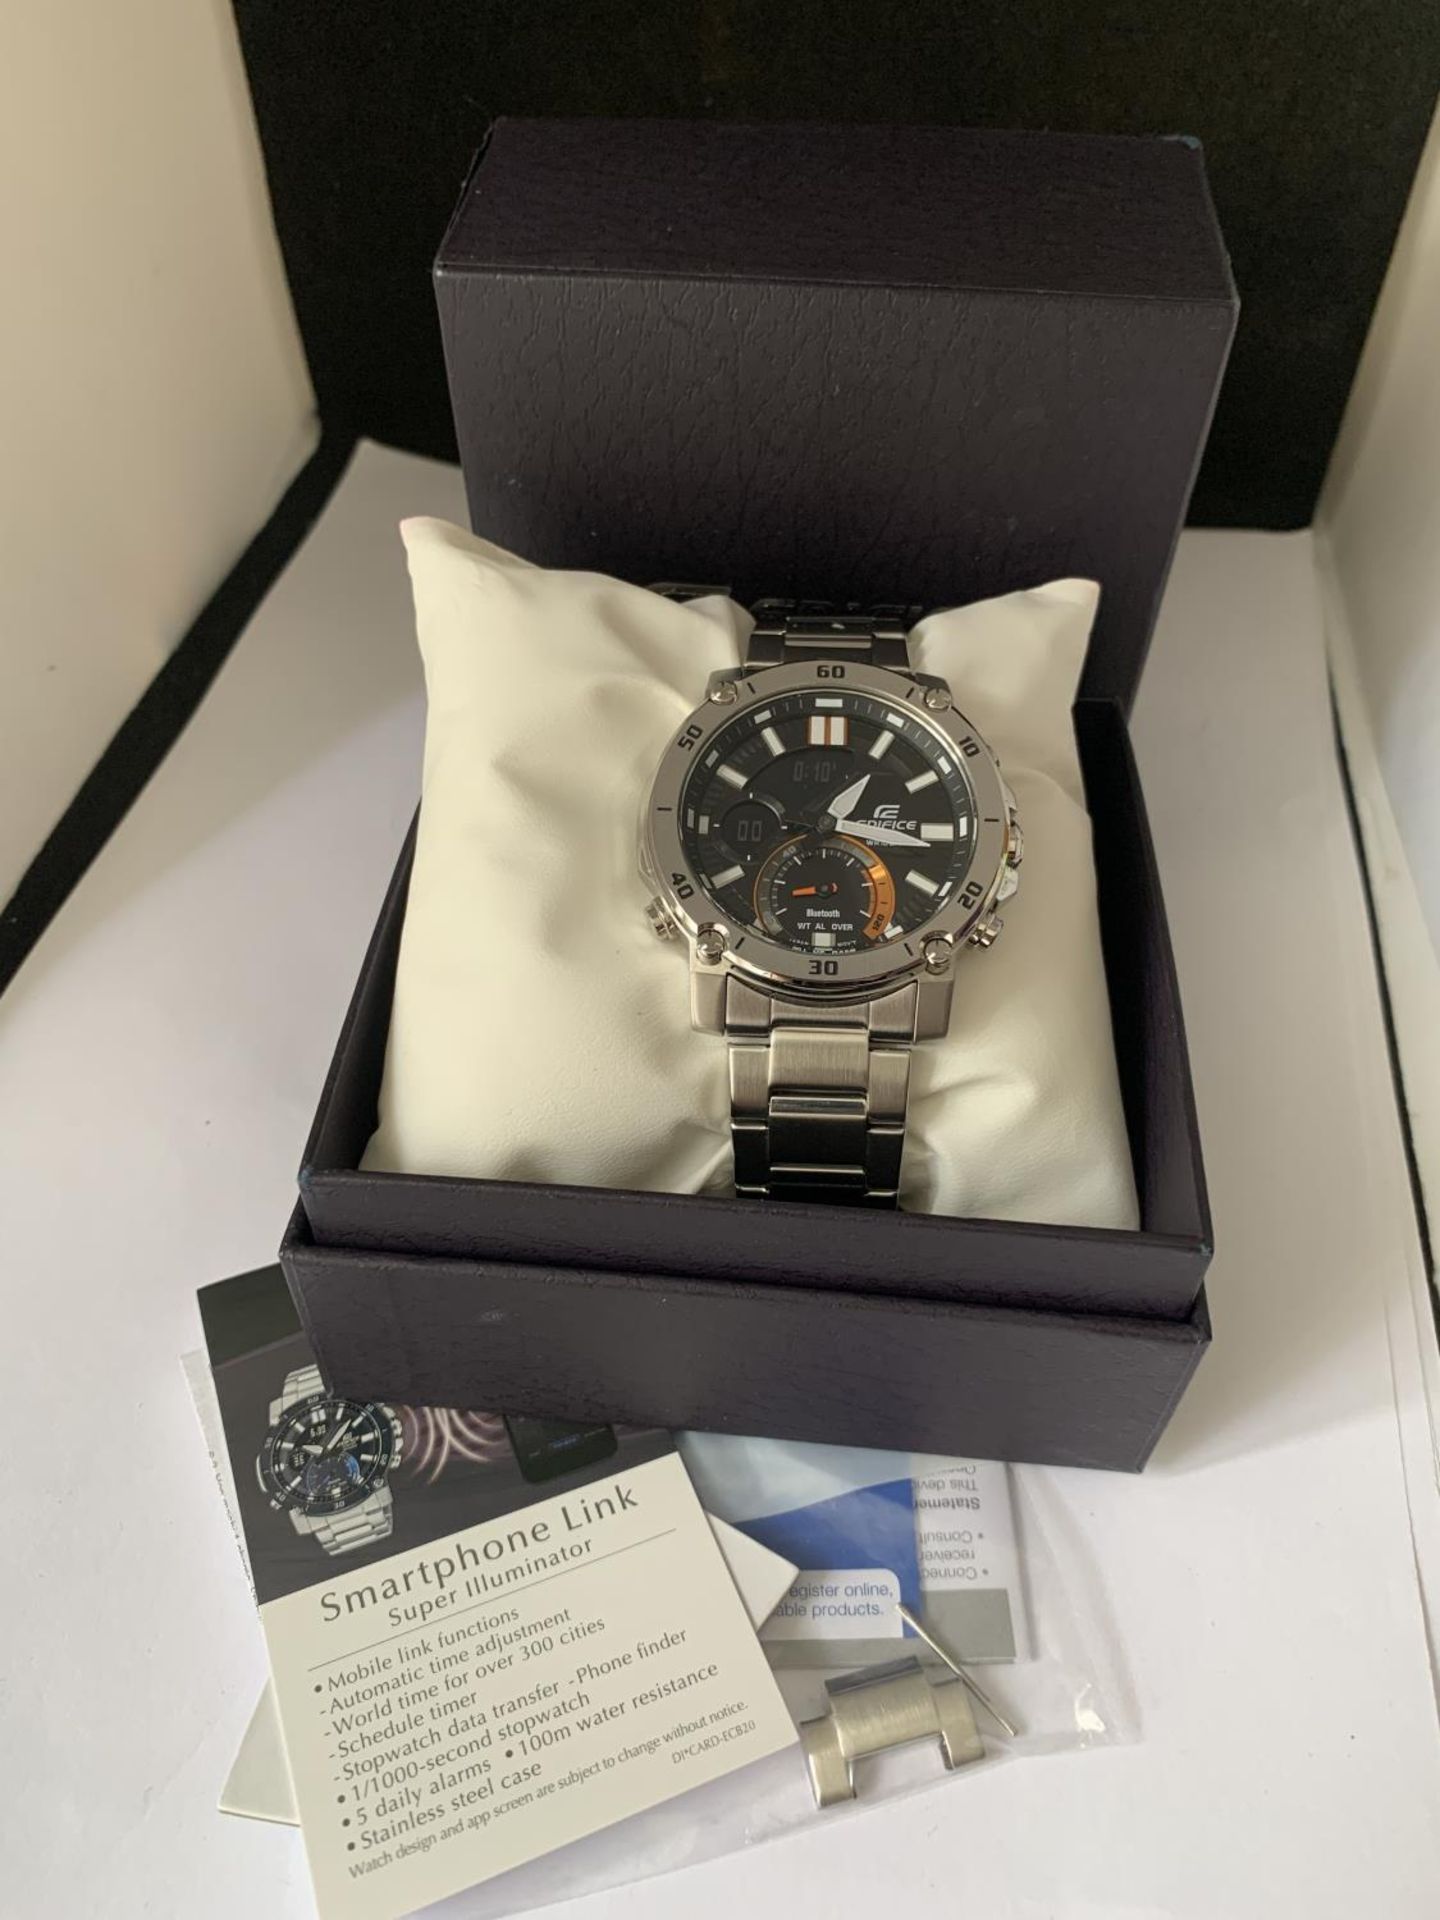 AN AS NEW AND BOXED CASIO EDIFICE BLUE TOOTH WRIST WATCH SEEN WORKING BUT NO WARRANTY